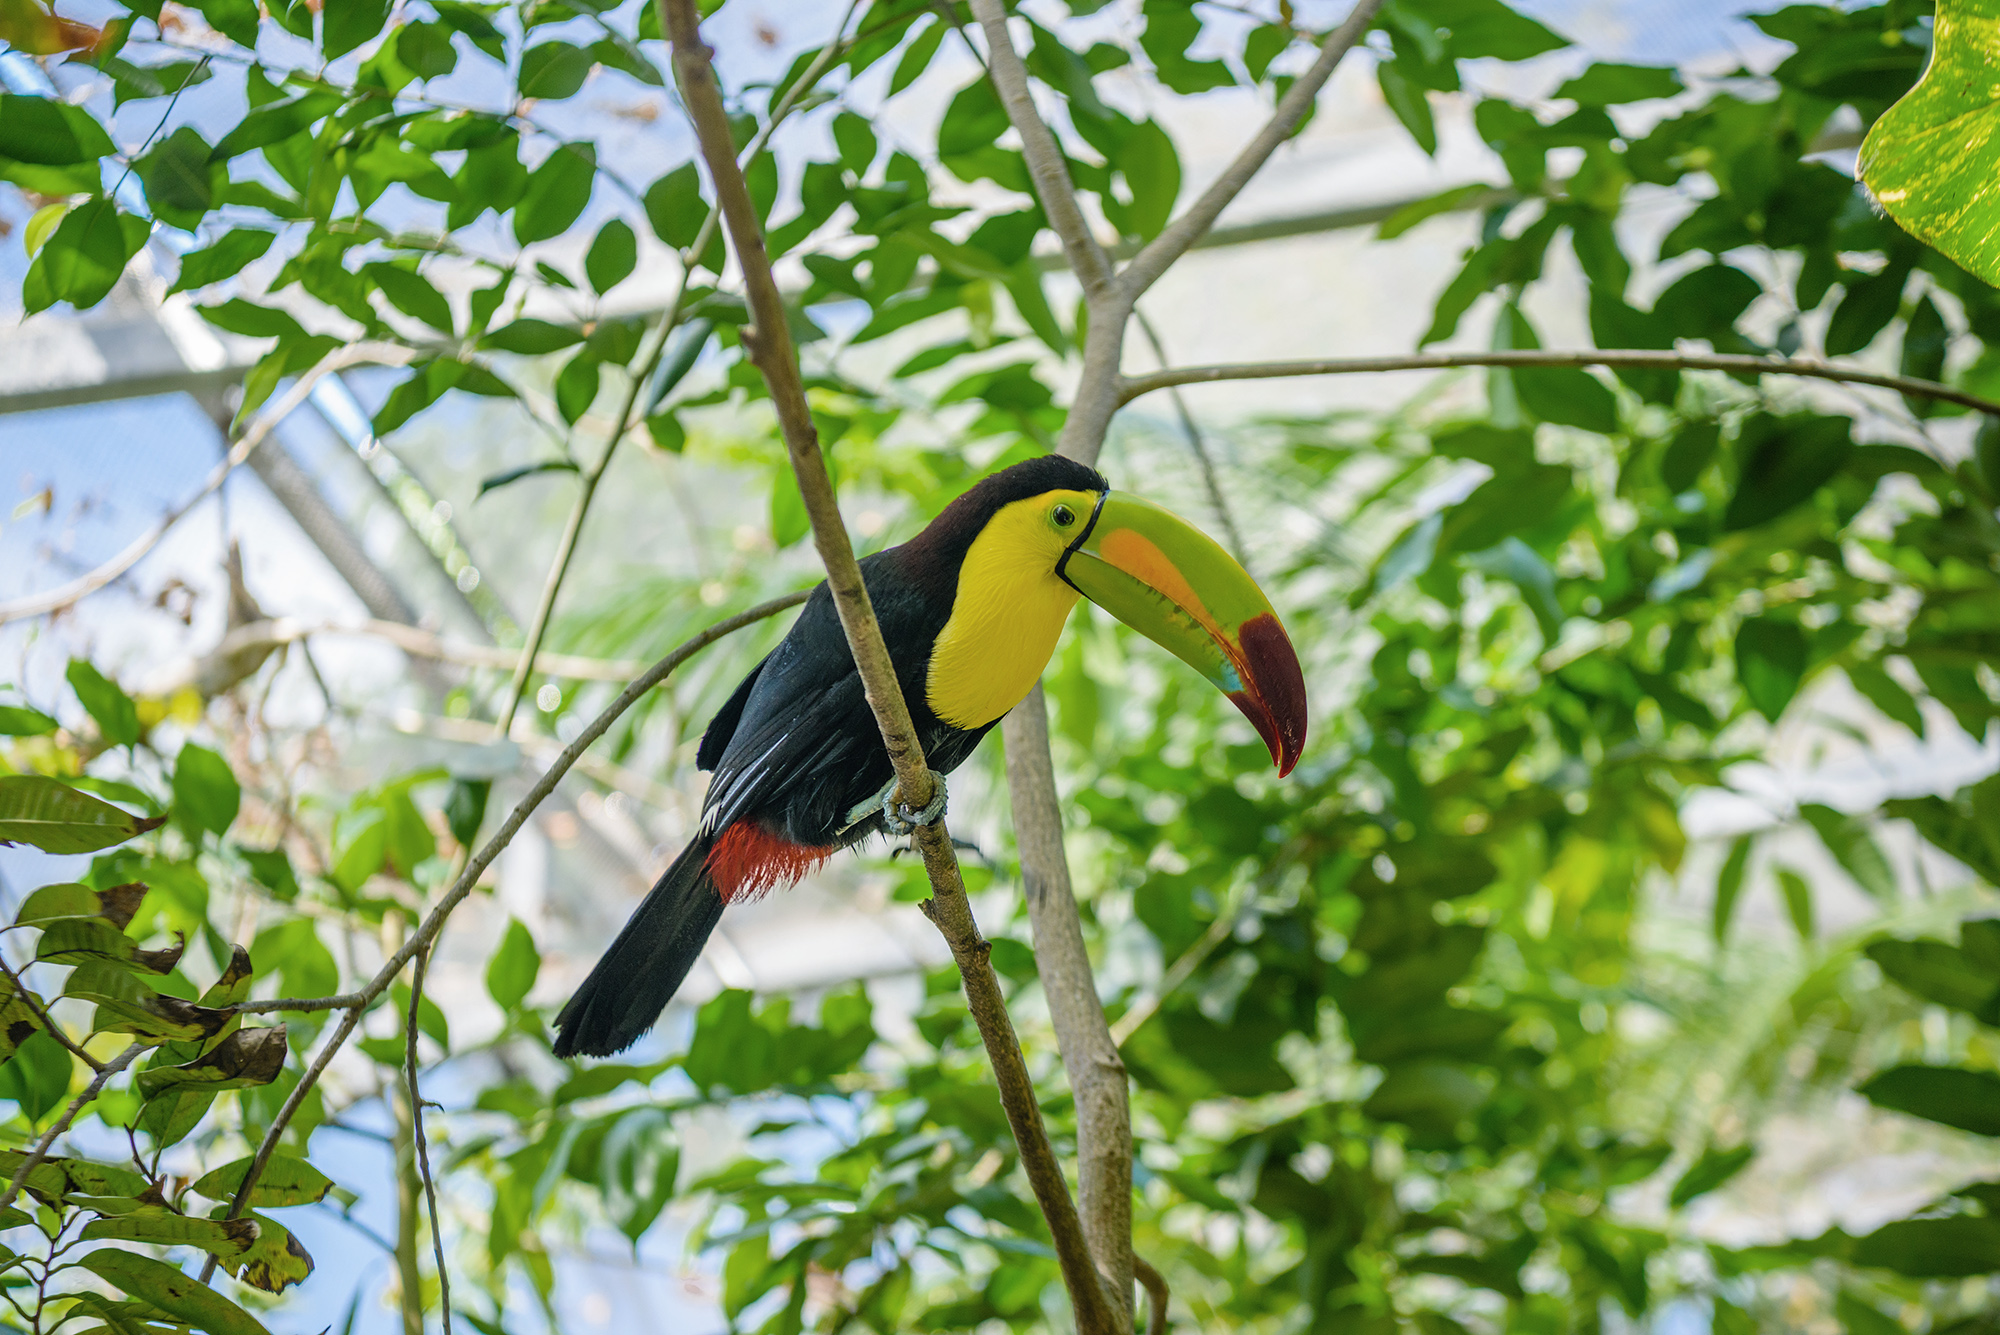 Keel-billed Toucan, Ramphastos sulfuratus, bird with big bill sitting on the branch in the forest, nature travel in central America, Playa del Carmen, Riviera Maya, Yu atan, Mexico.